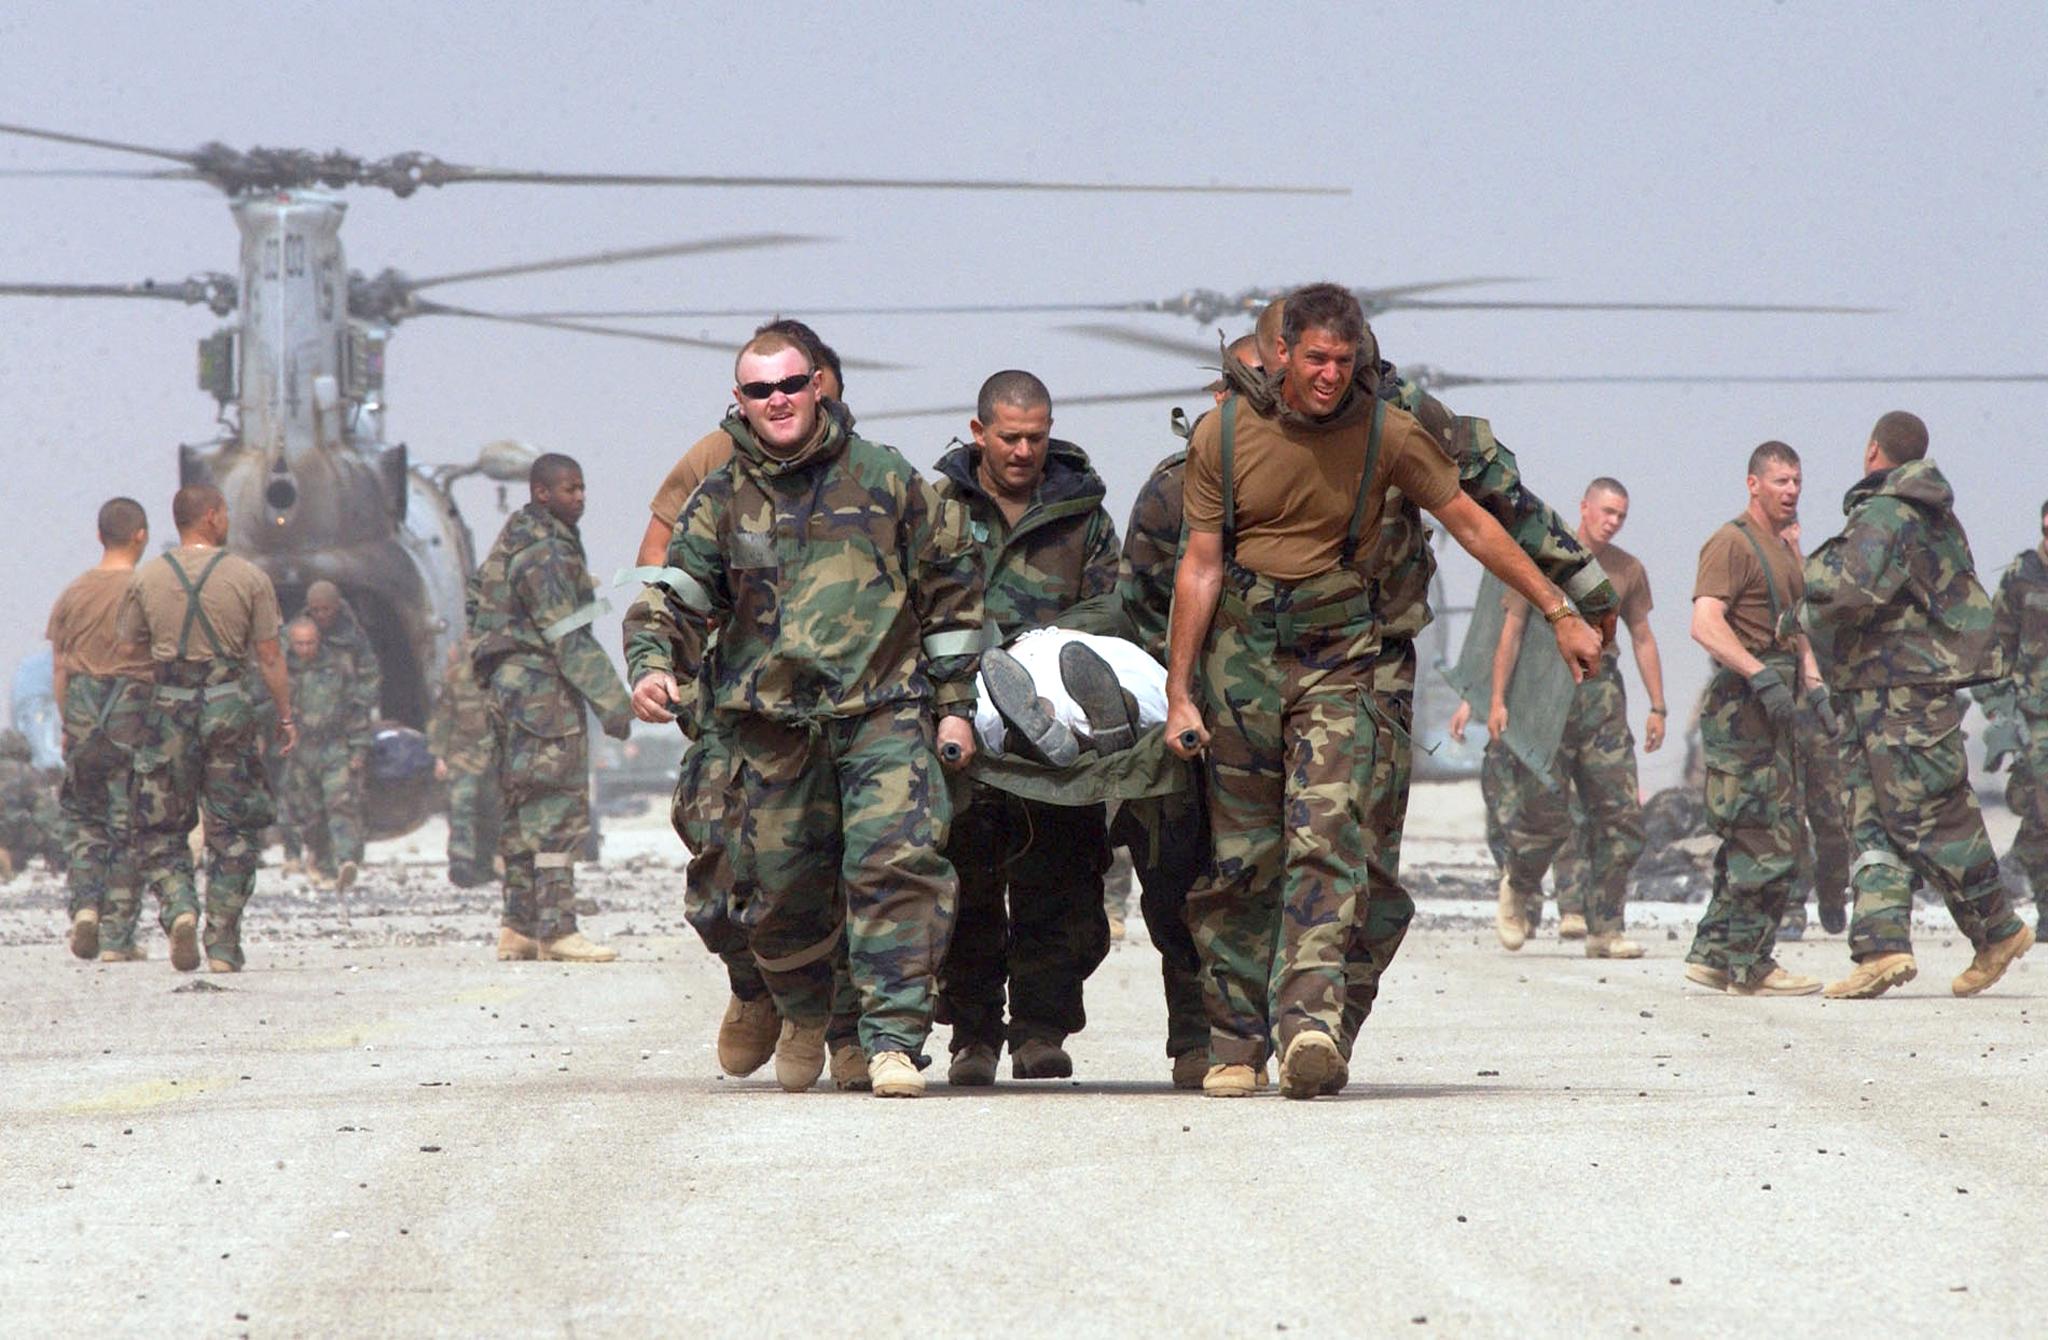 PHOTO: U.S. Army soldiers from the 3rd Infantry Division carry a wounded Iraqi prisoner of war to the battalion aid station on a captured airfield in southern Iraq, March 24, 2003.